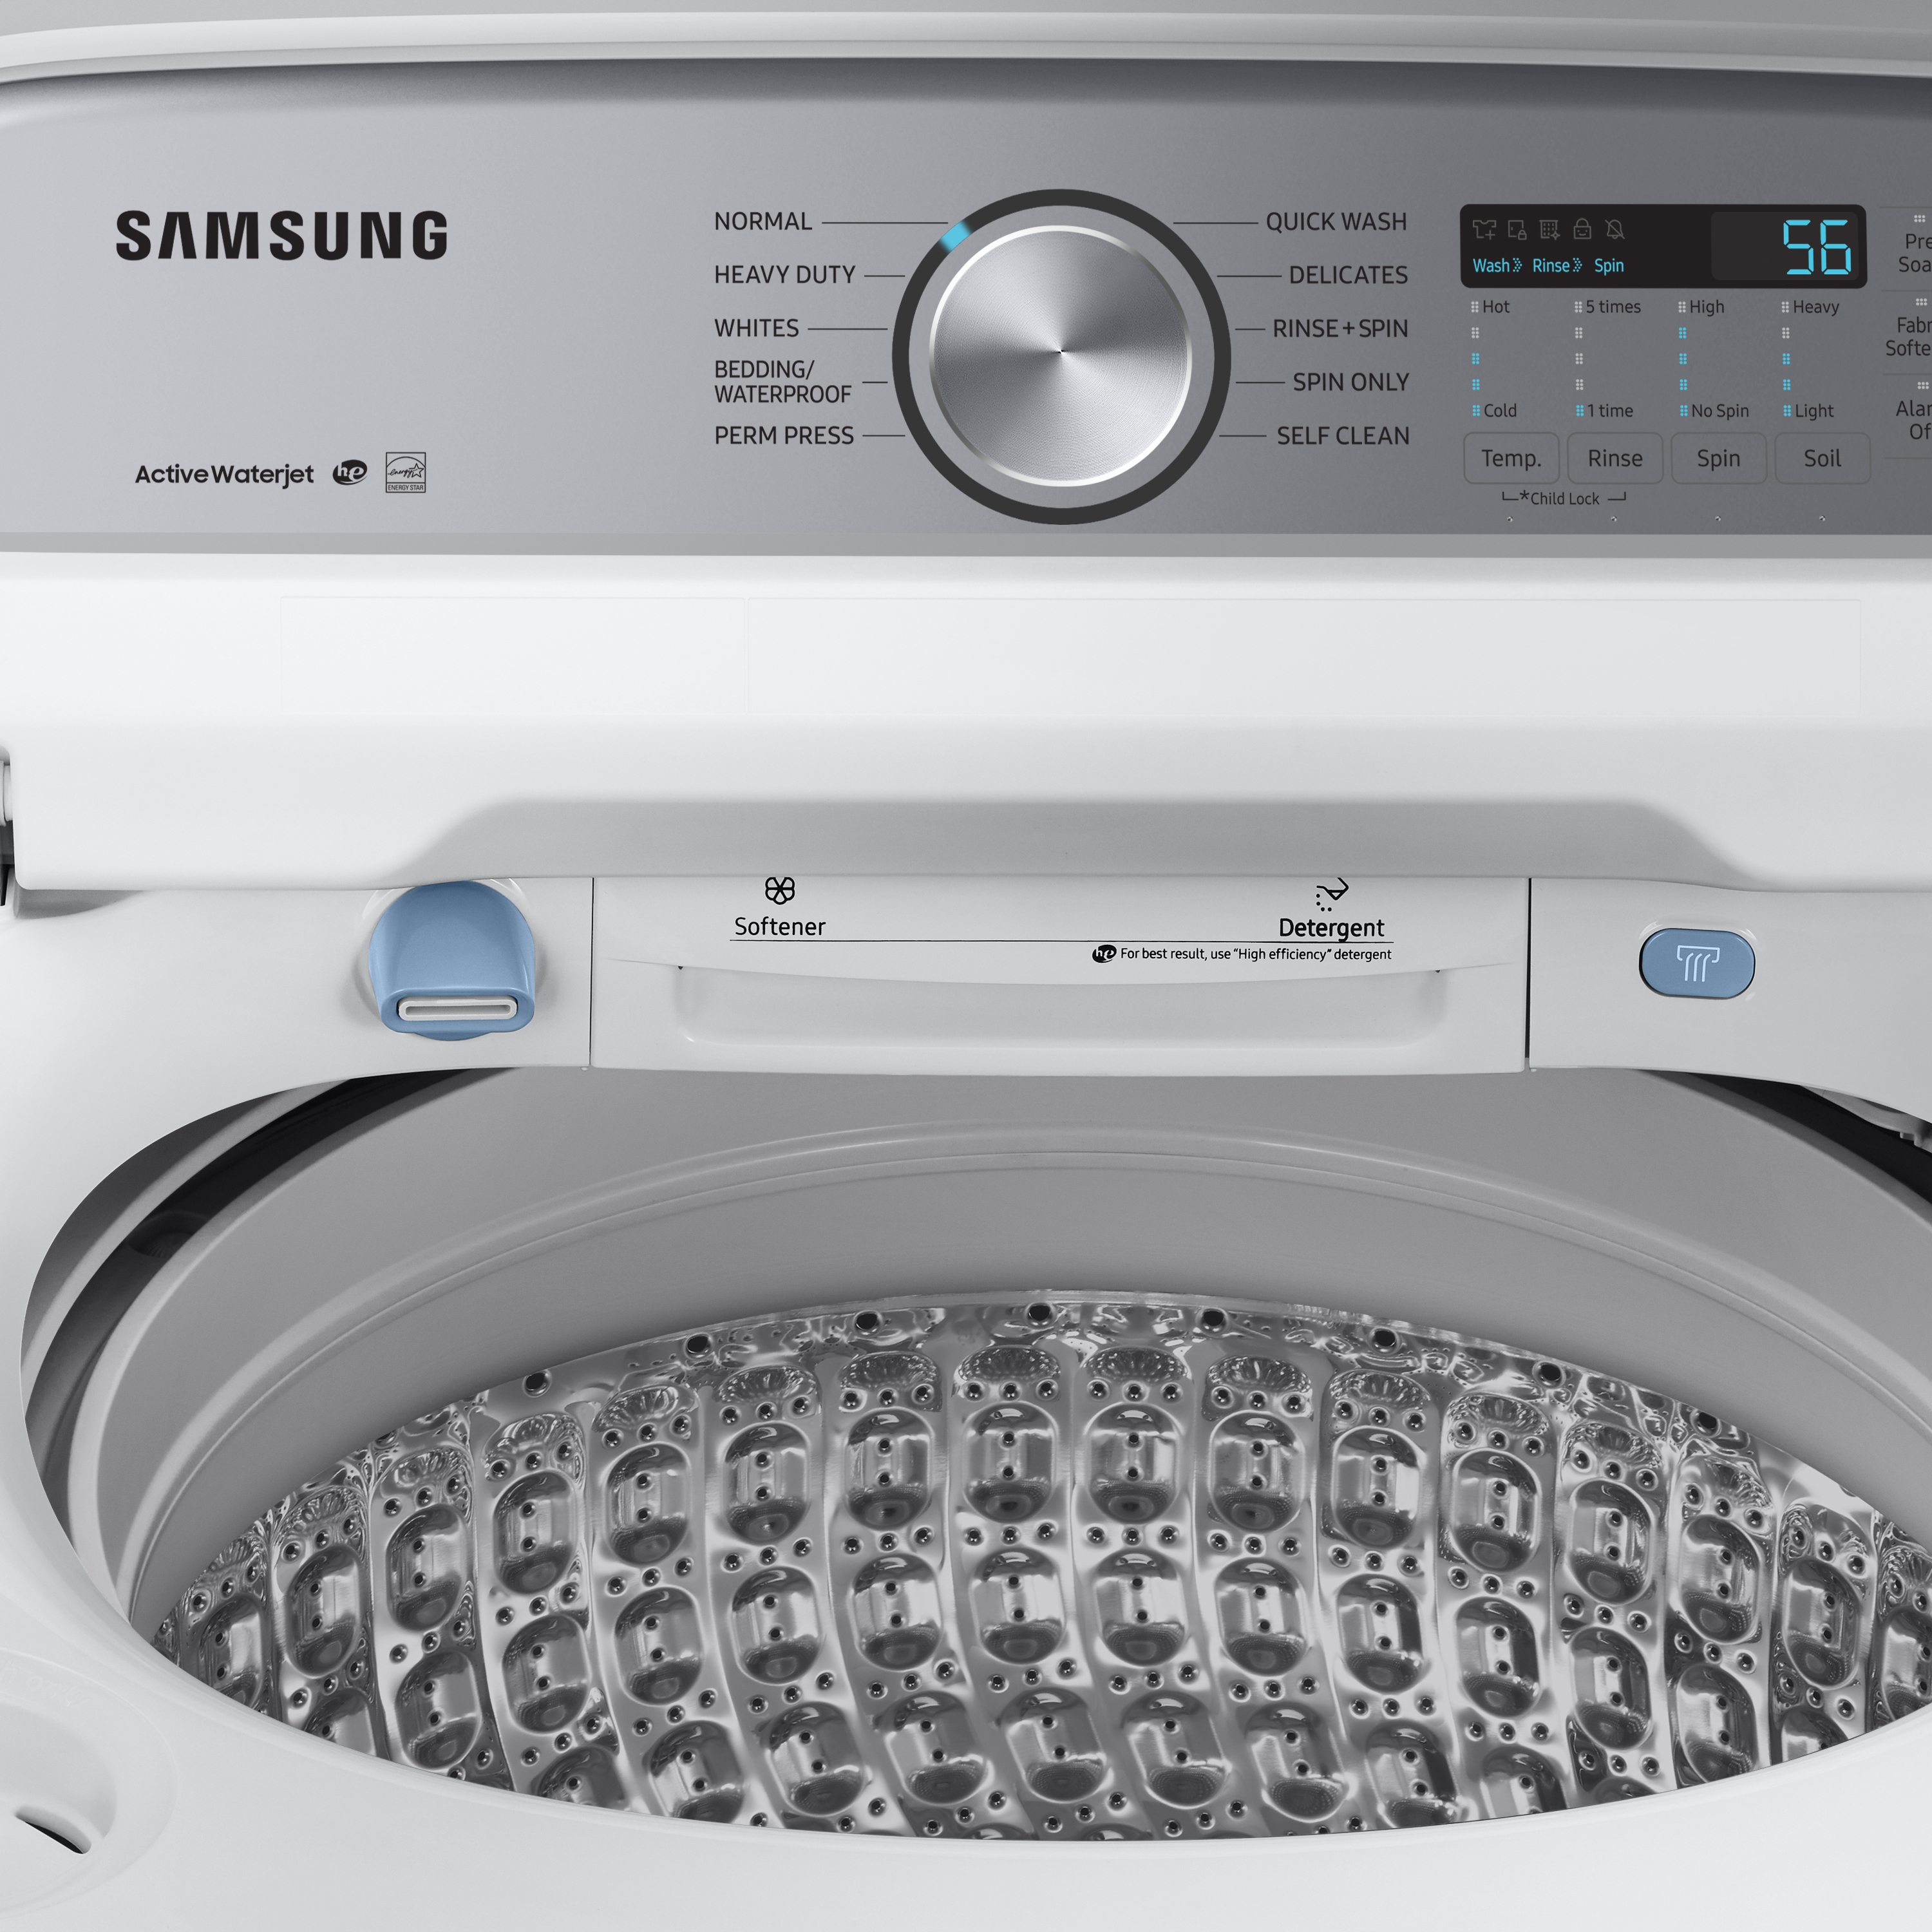 4.9 cu. - US Capacity Washers ActiveWave™ with WaterJet Washer Agitator Load | Active Top Samsung WA49B5205AW/US ft. and White in